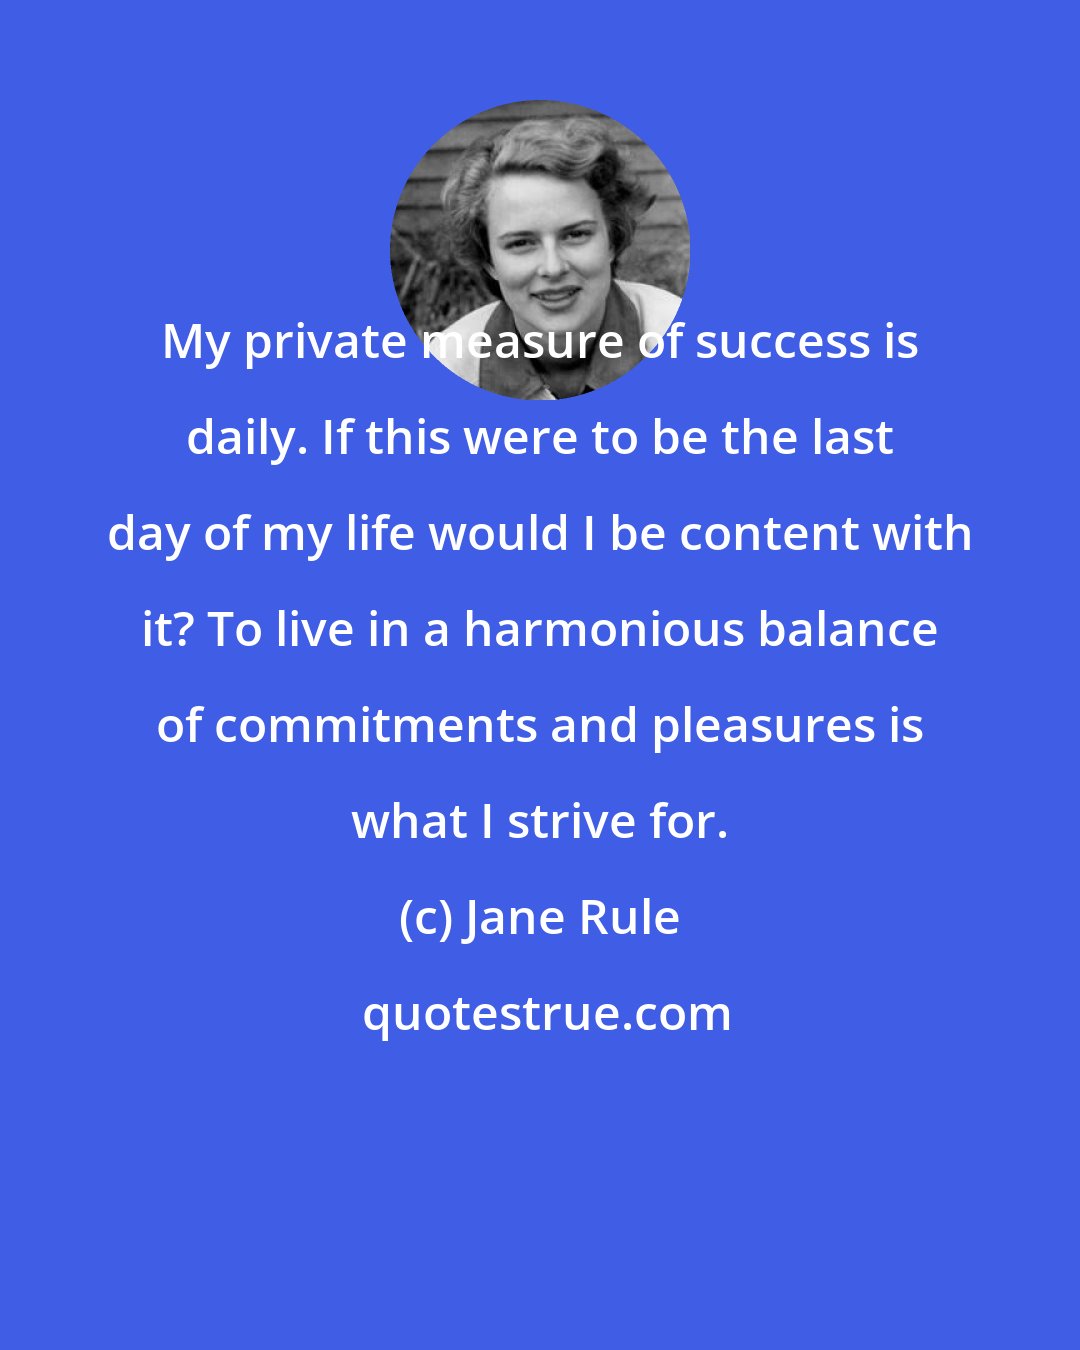 Jane Rule: My private measure of success is daily. If this were to be the last day of my life would I be content with it? To live in a harmonious balance of commitments and pleasures is what I strive for.